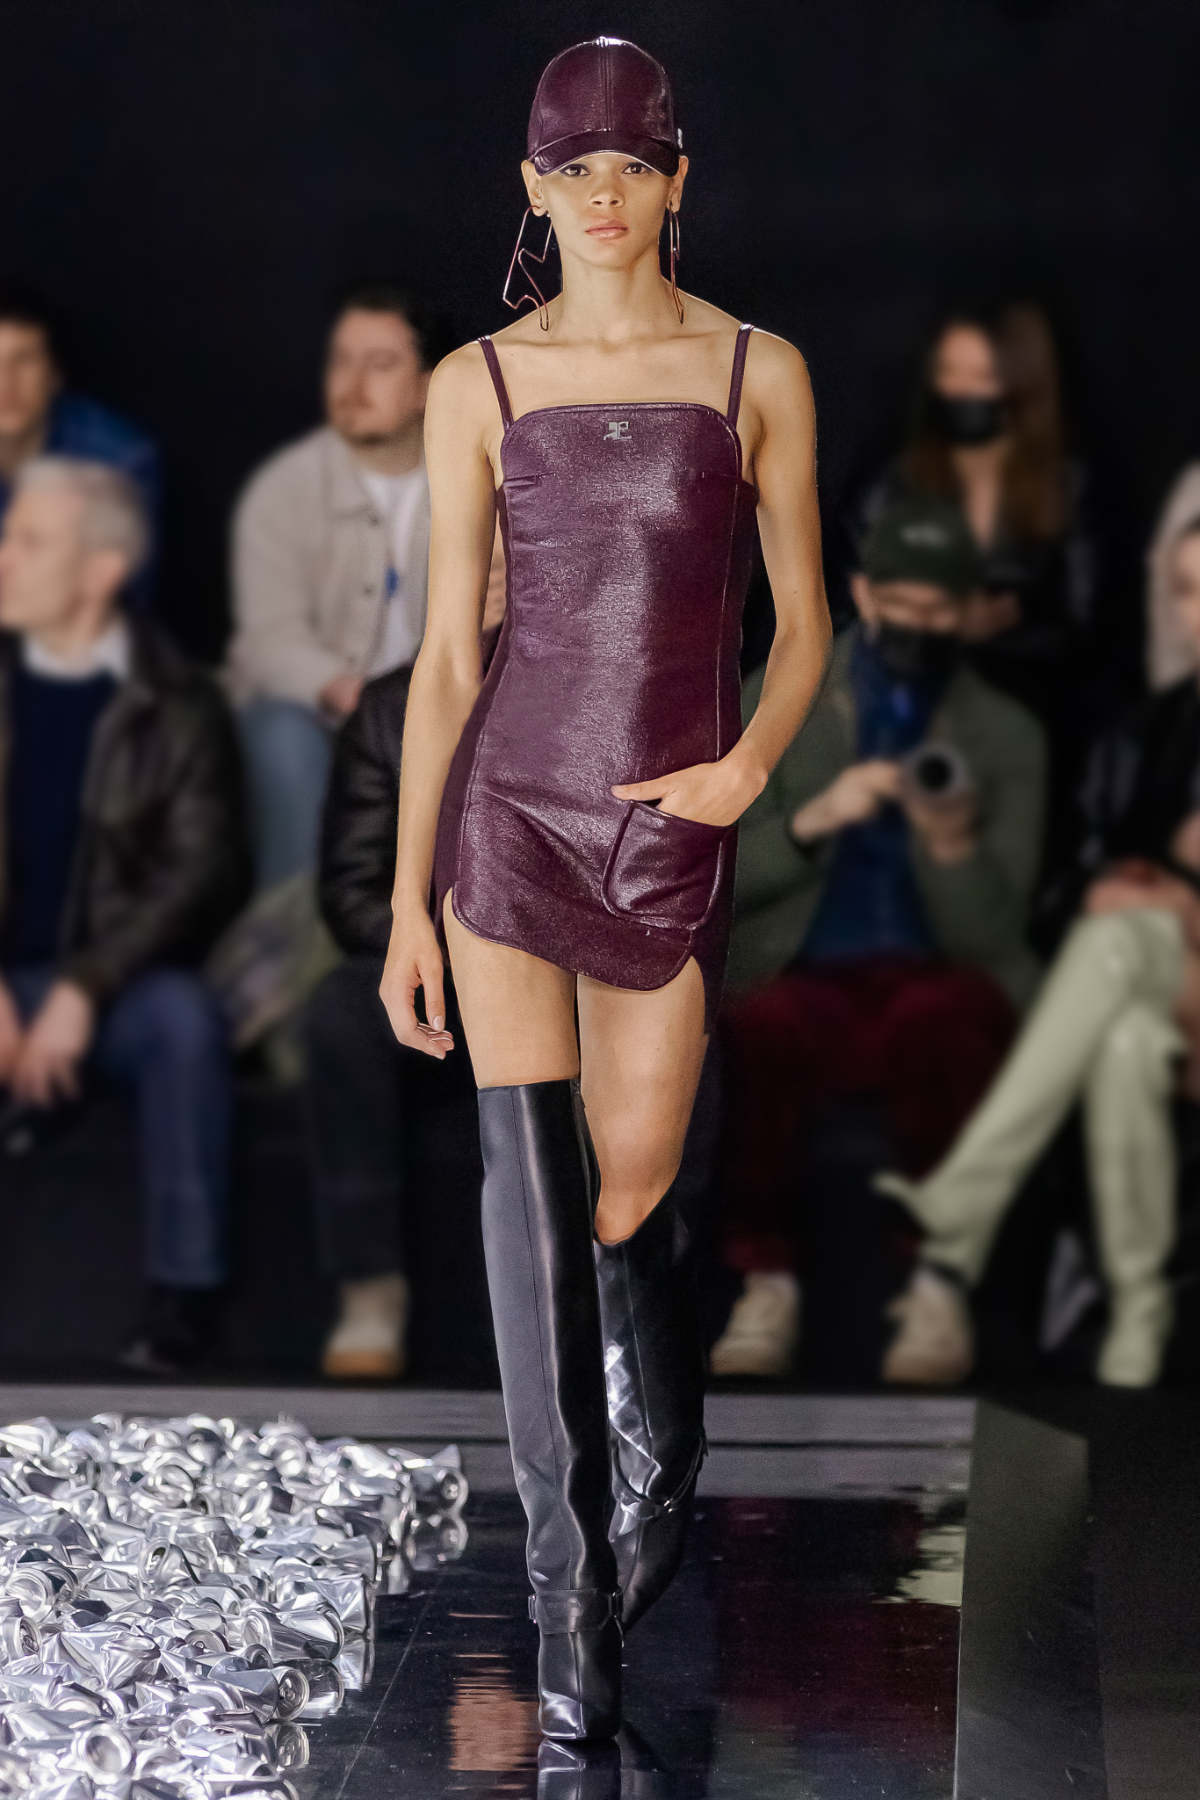 Courrèges Presents Its New Fall Winter 2022/2023 Collection